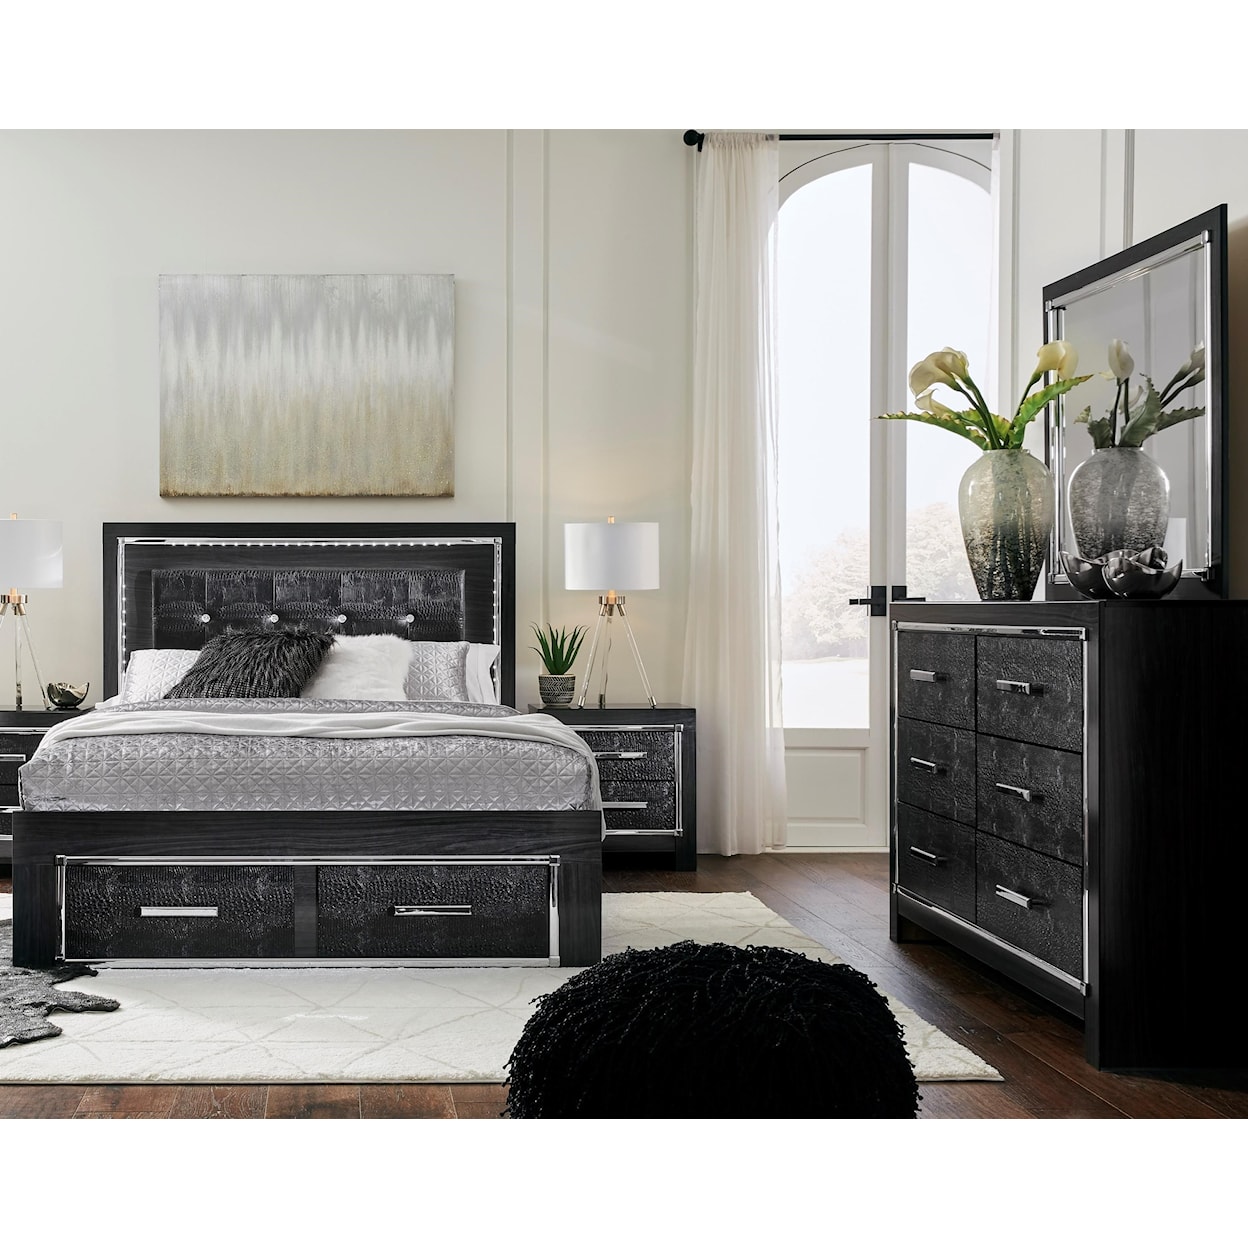 Signature Design by Ashley Kaydell Queen Bedroom Group